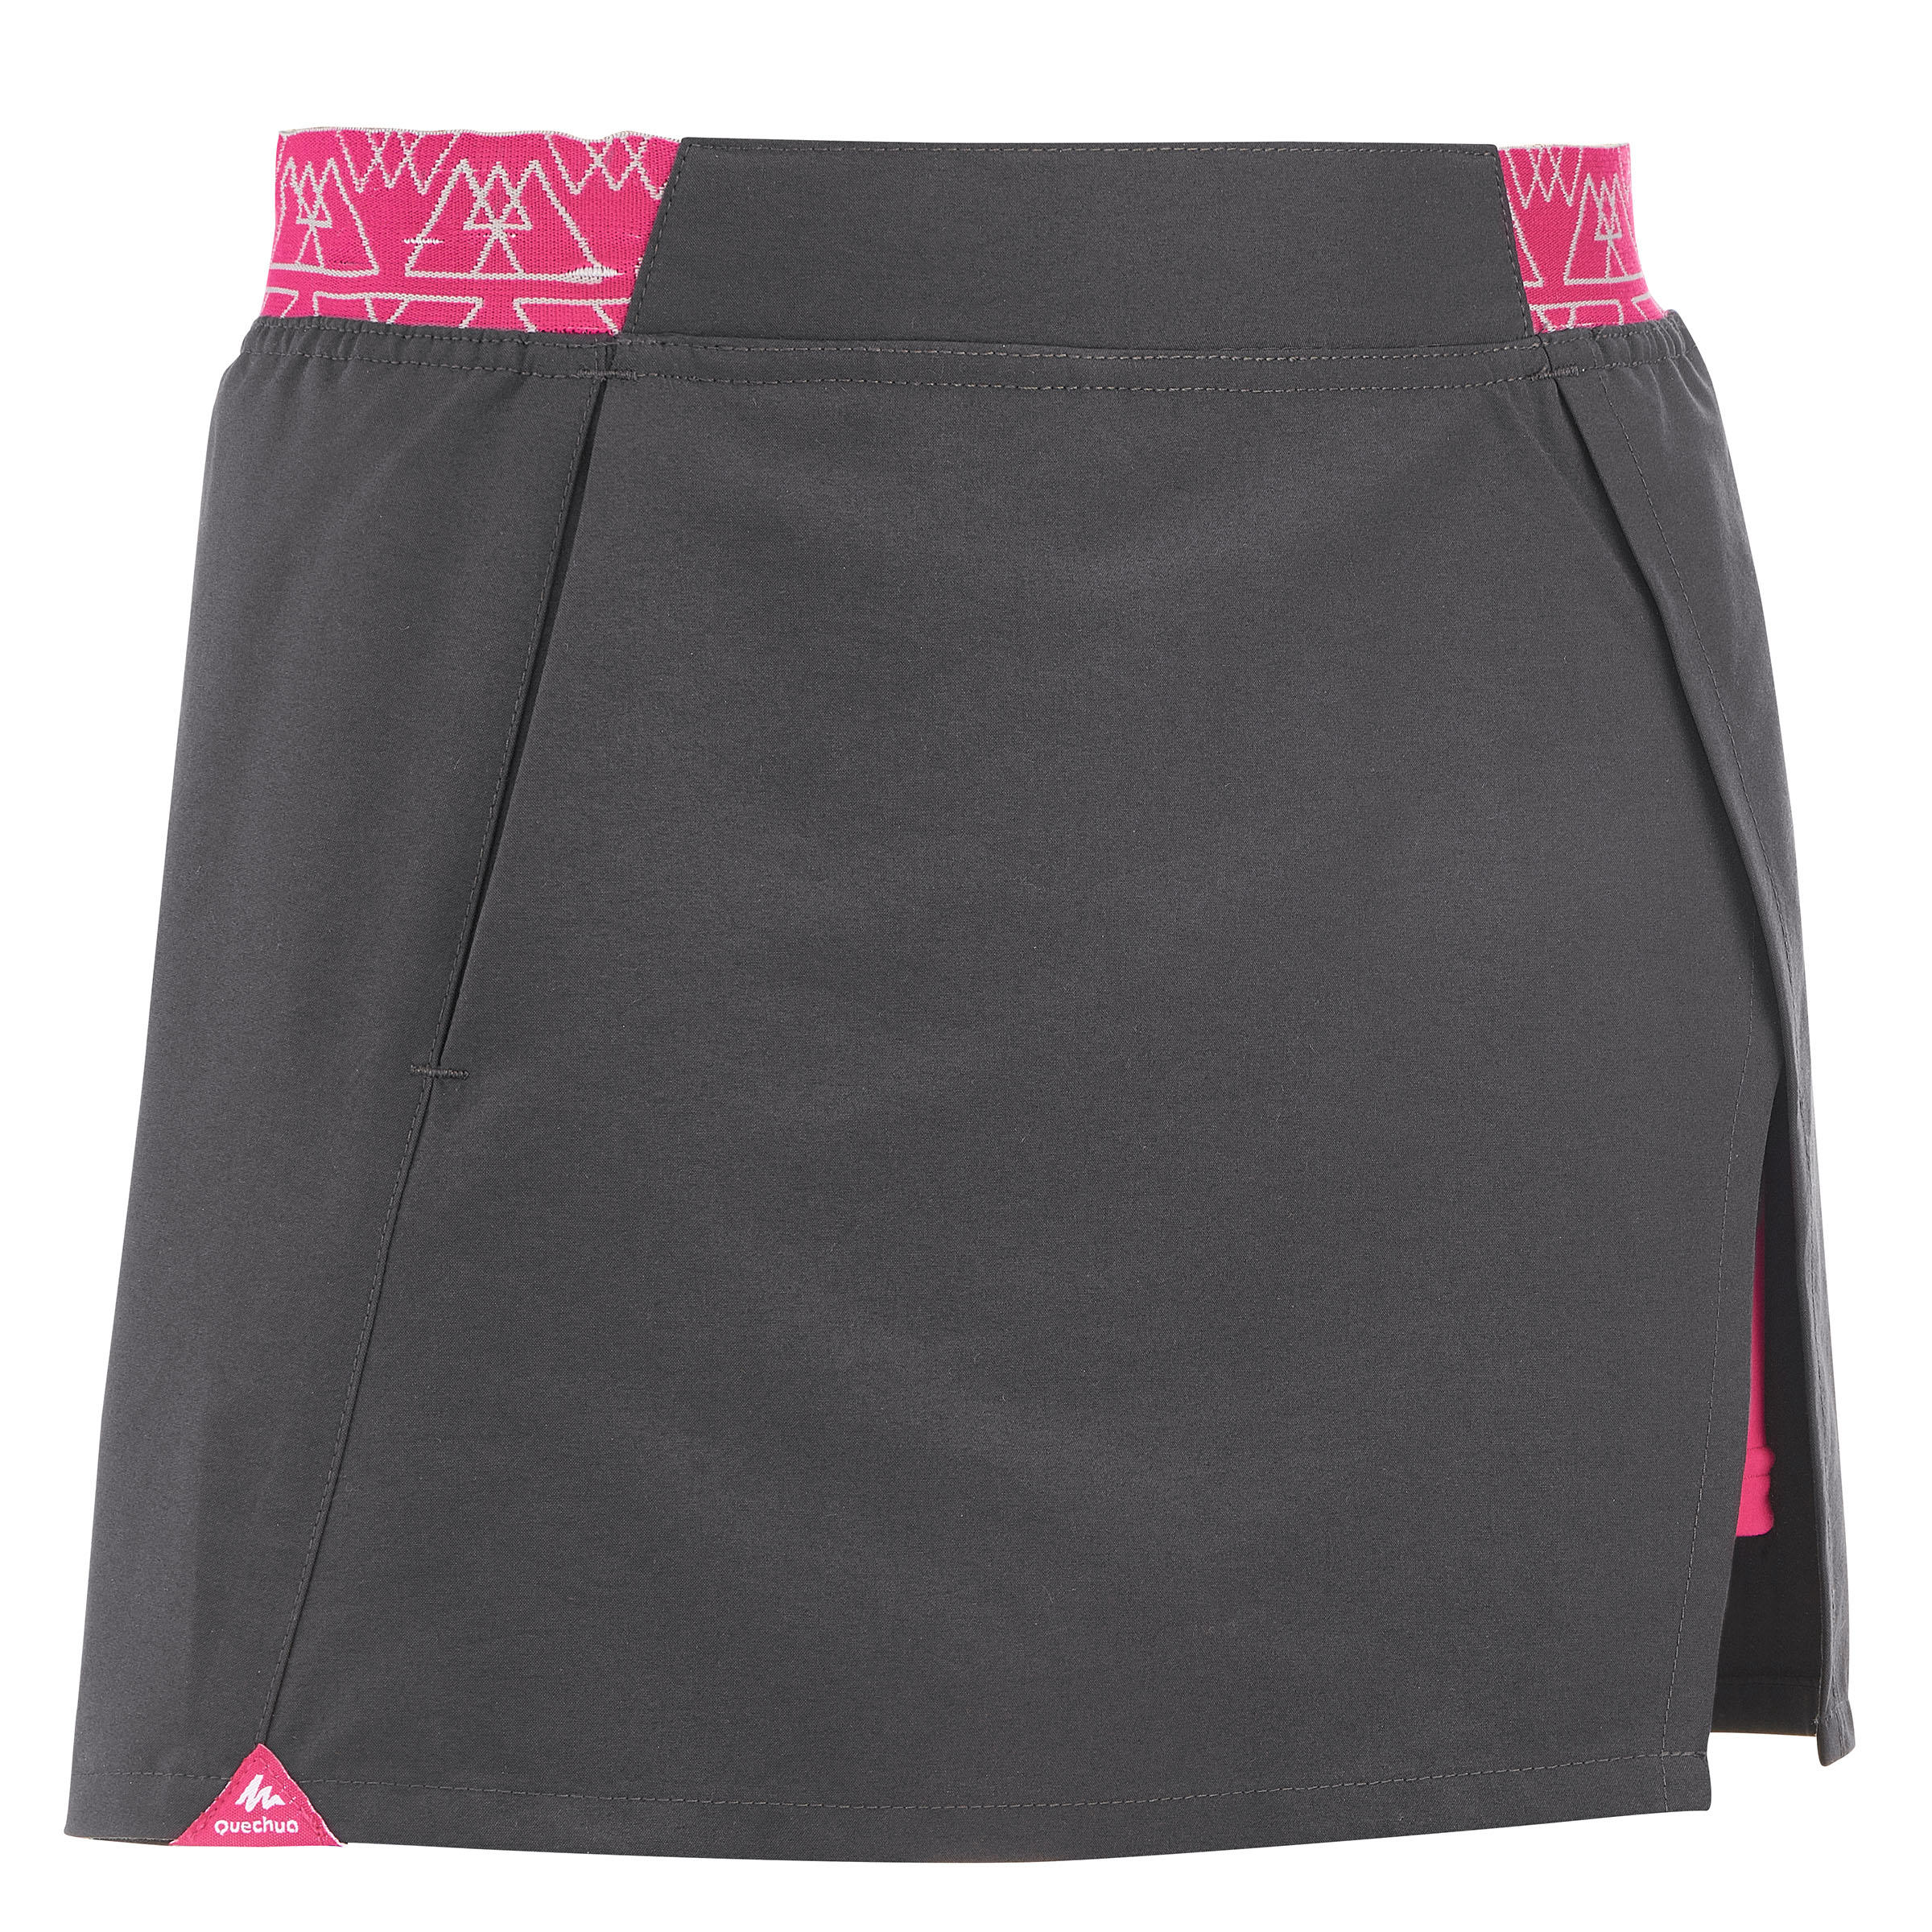 QUECHUA Hike 100 Children’s Hiking Shorts Skirt - Grey and Pink